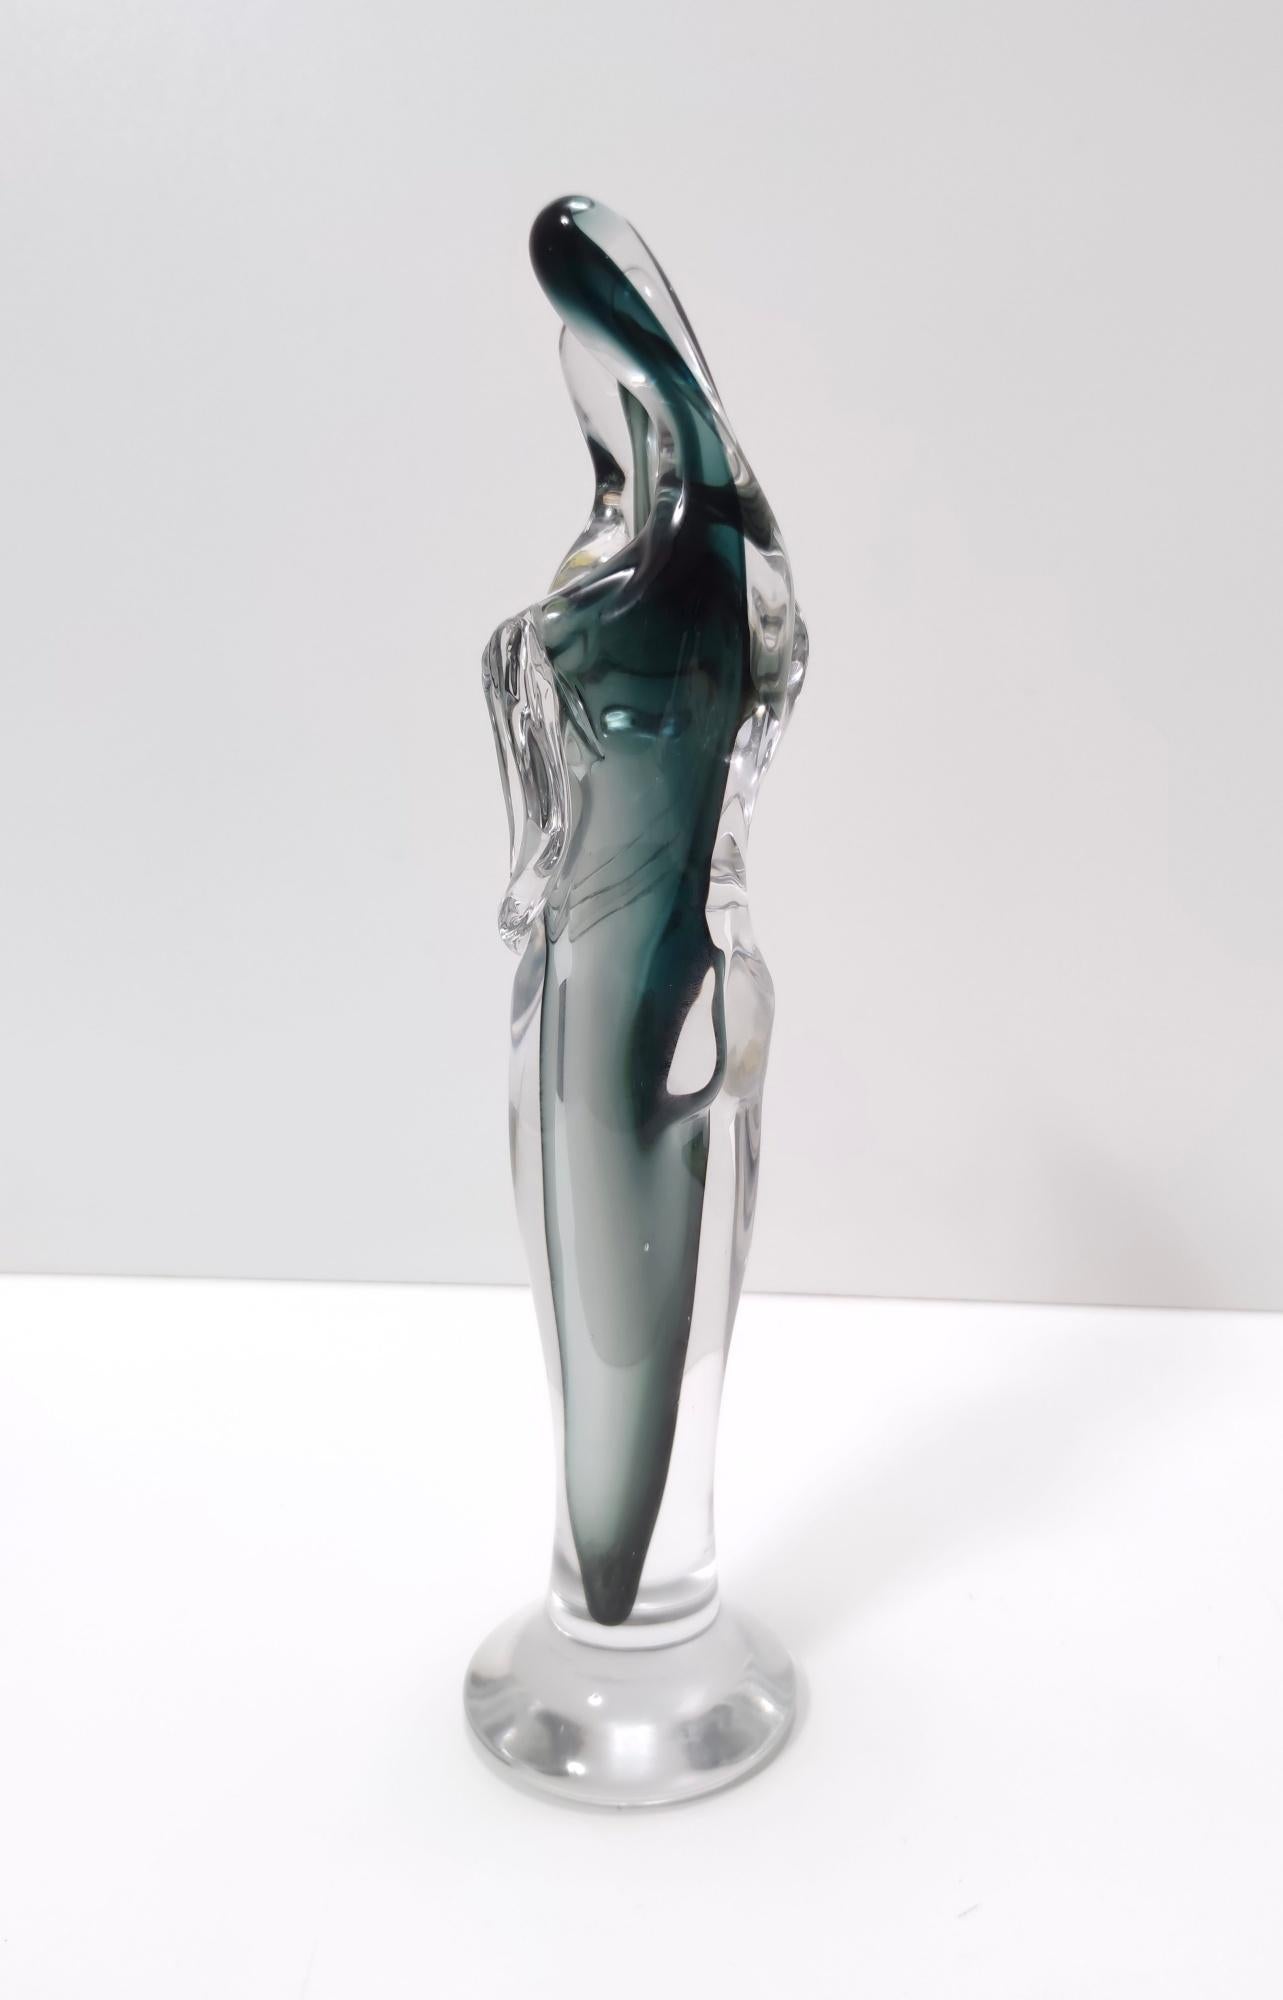 Ocean Green Murano Glass Decorative Item of Two Lovers Ascribable to Seguso 1